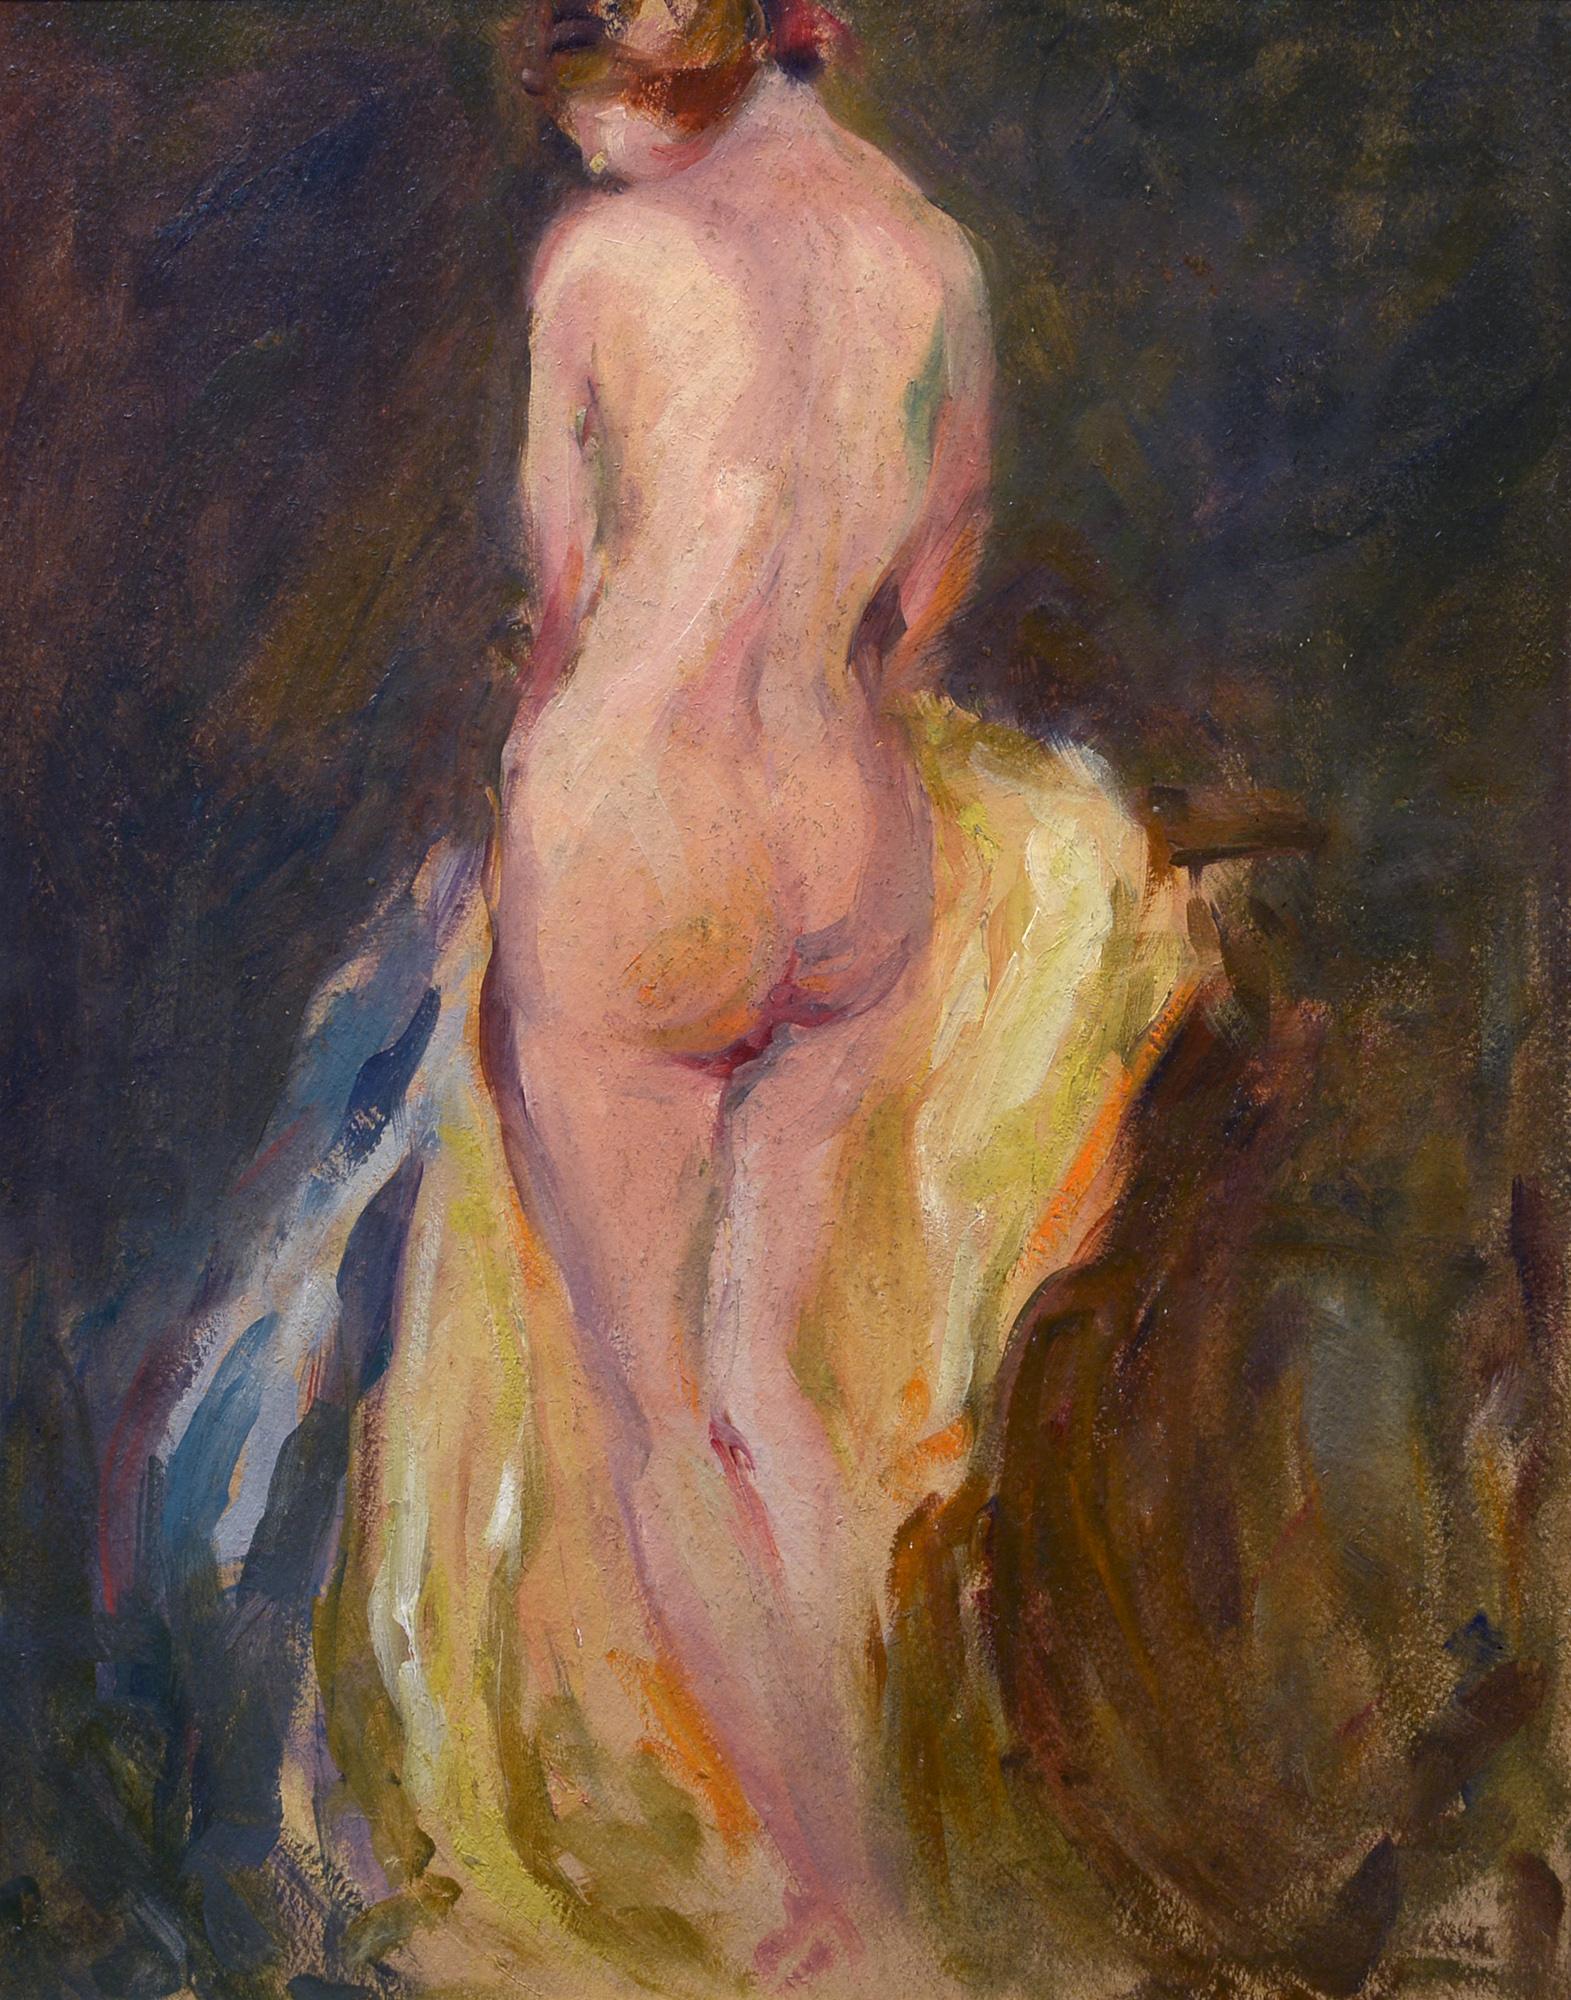 Spanish Gown, Standing Nude Figure, American Impressionist, 1920s, Oil on Board